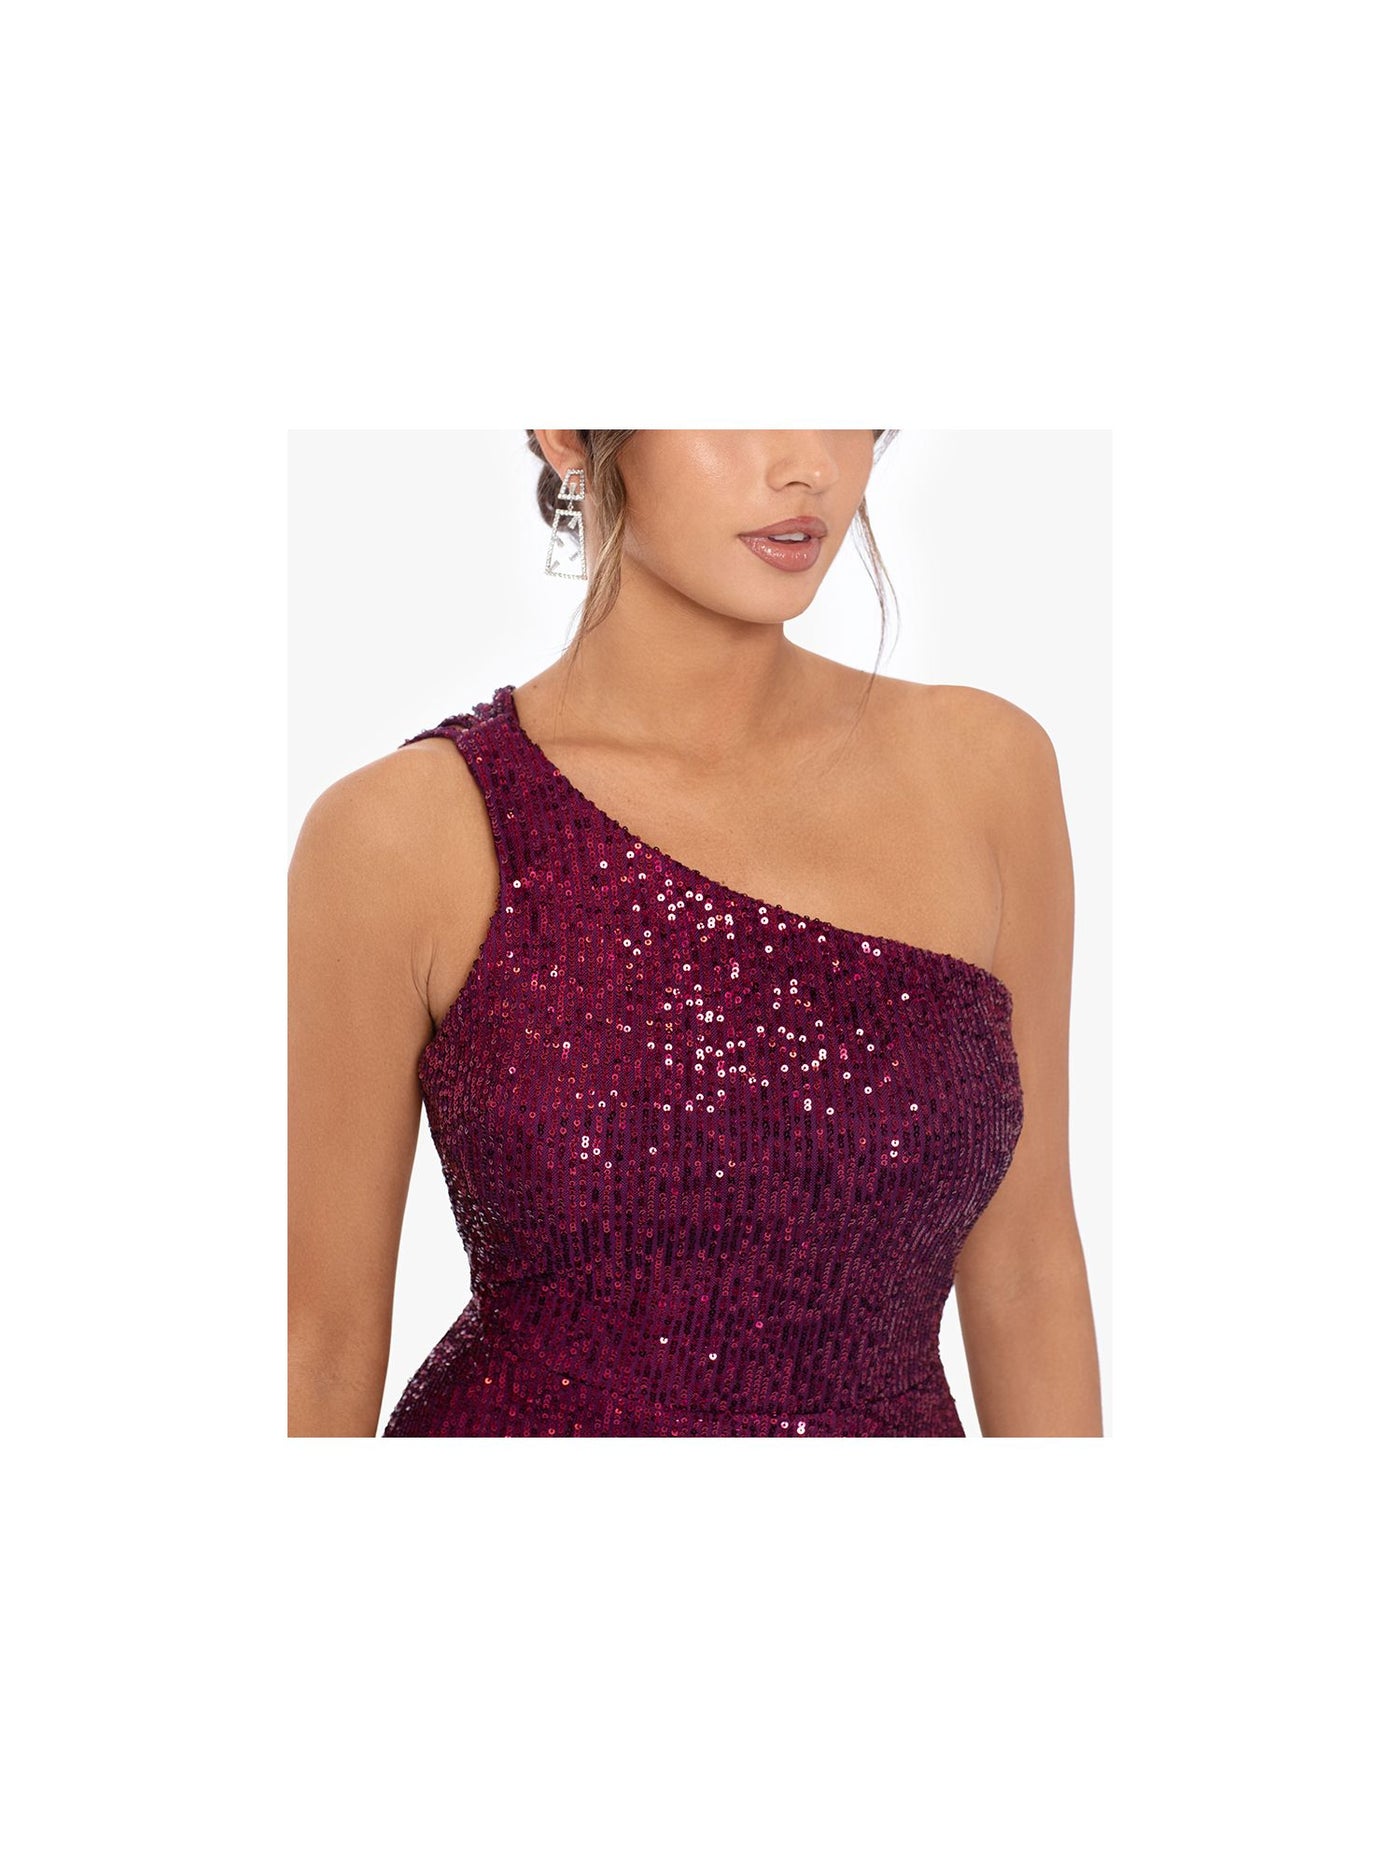 BLONDIE NITES Womens Purple Sequined Zippered Padded Slit Lined Lace Up Back Sleeveless Asymmetrical Neckline Full-Length Formal Gown Dress Juniors 11